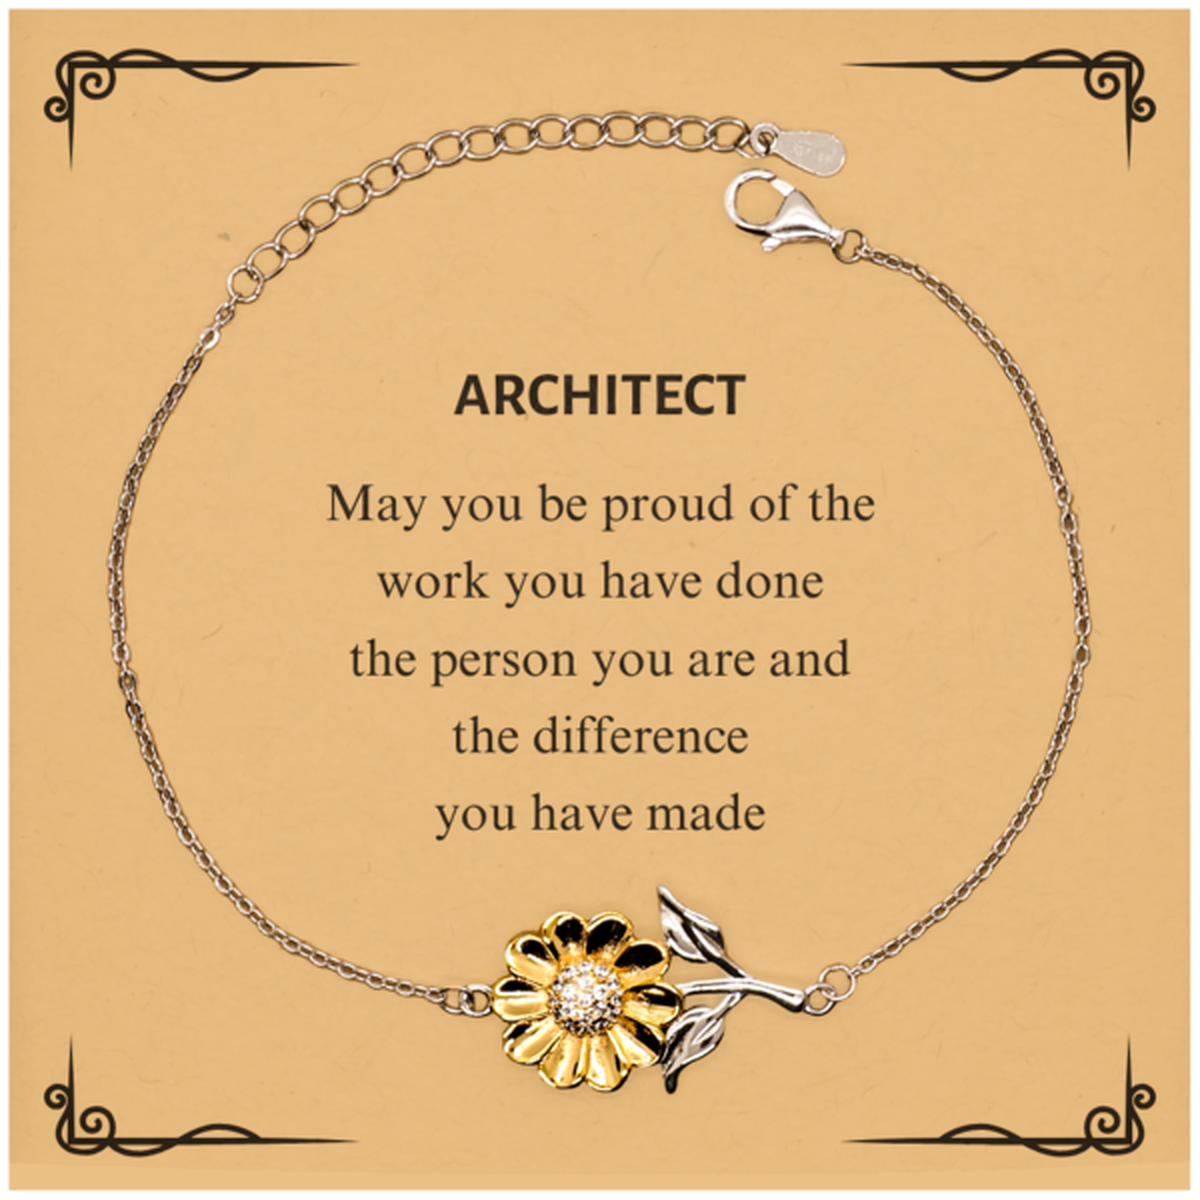 Architect May you be proud of the work you have done, Retirement Architect Sunflower Bracelet for Colleague Appreciation Gifts Amazing for Architect